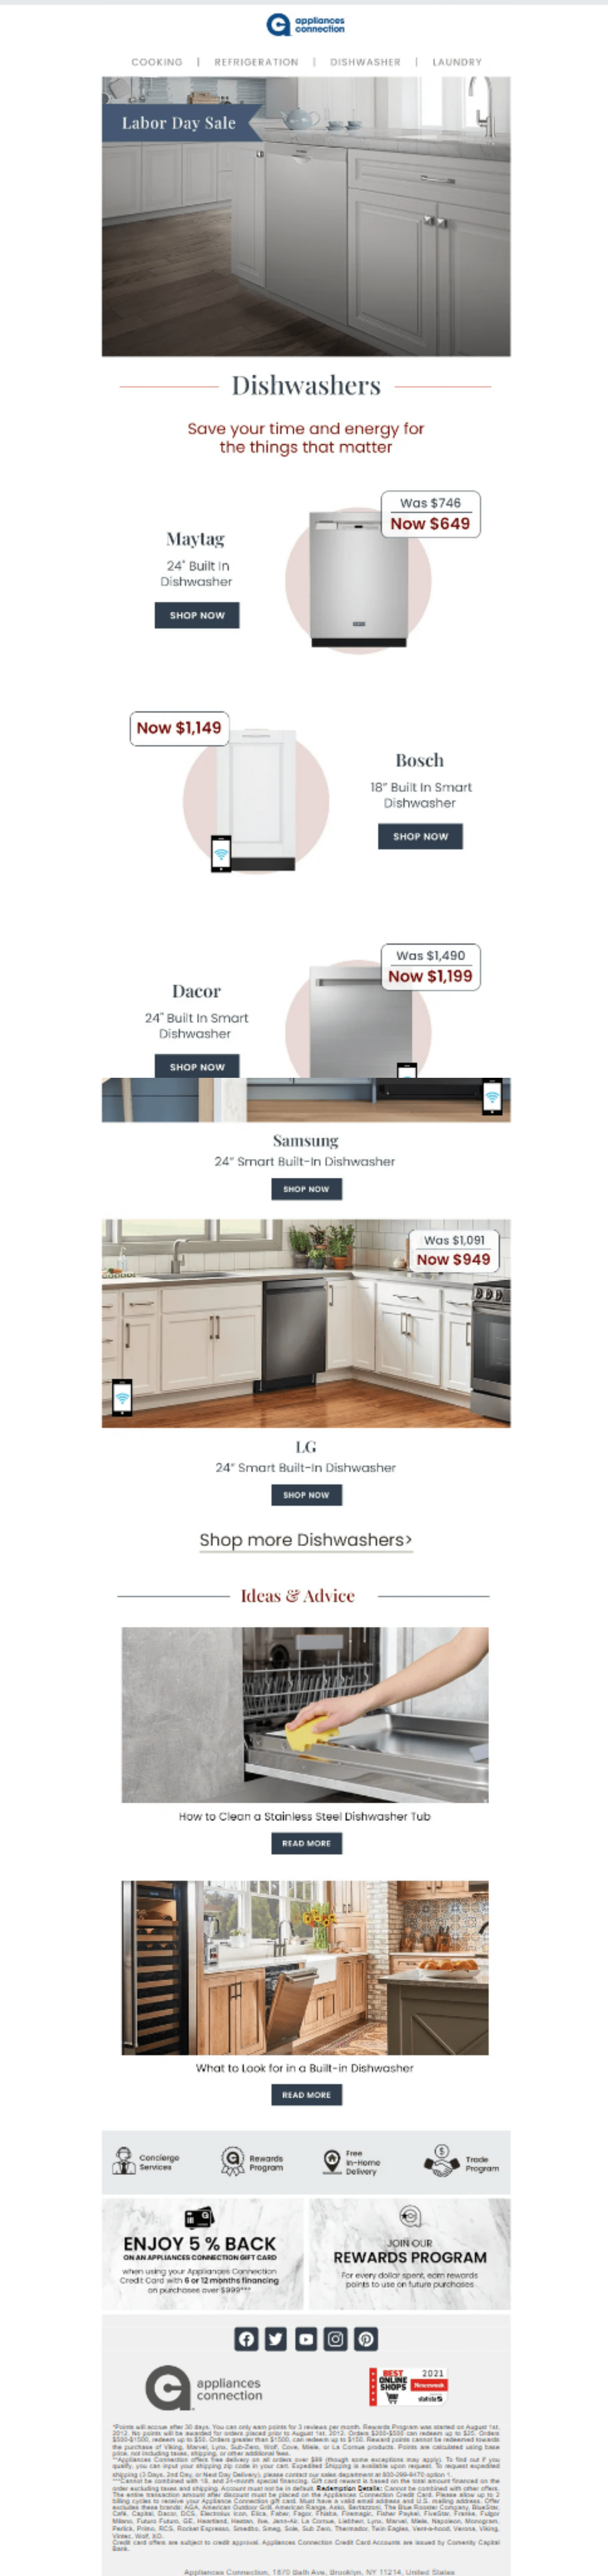 A Labor Day email that promotes a dishwasher sale with a tagline “Save your time and energy for things that matter”